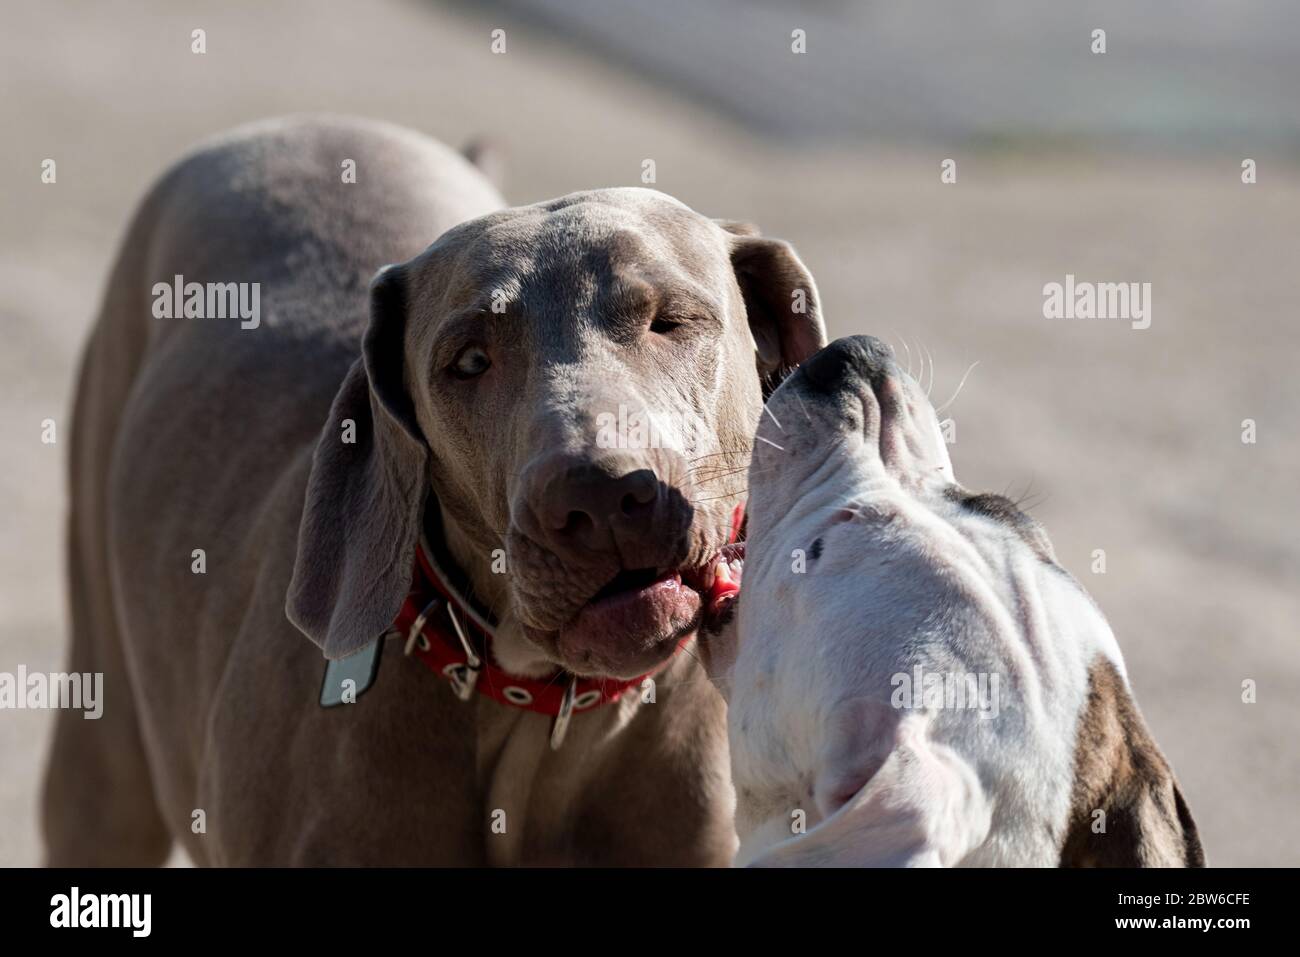 Dog fun. Two young Weimaraner and Pitbull dogs in play. Socialization of dogs, biting inhibition exercise and calming signals. Stock Photo